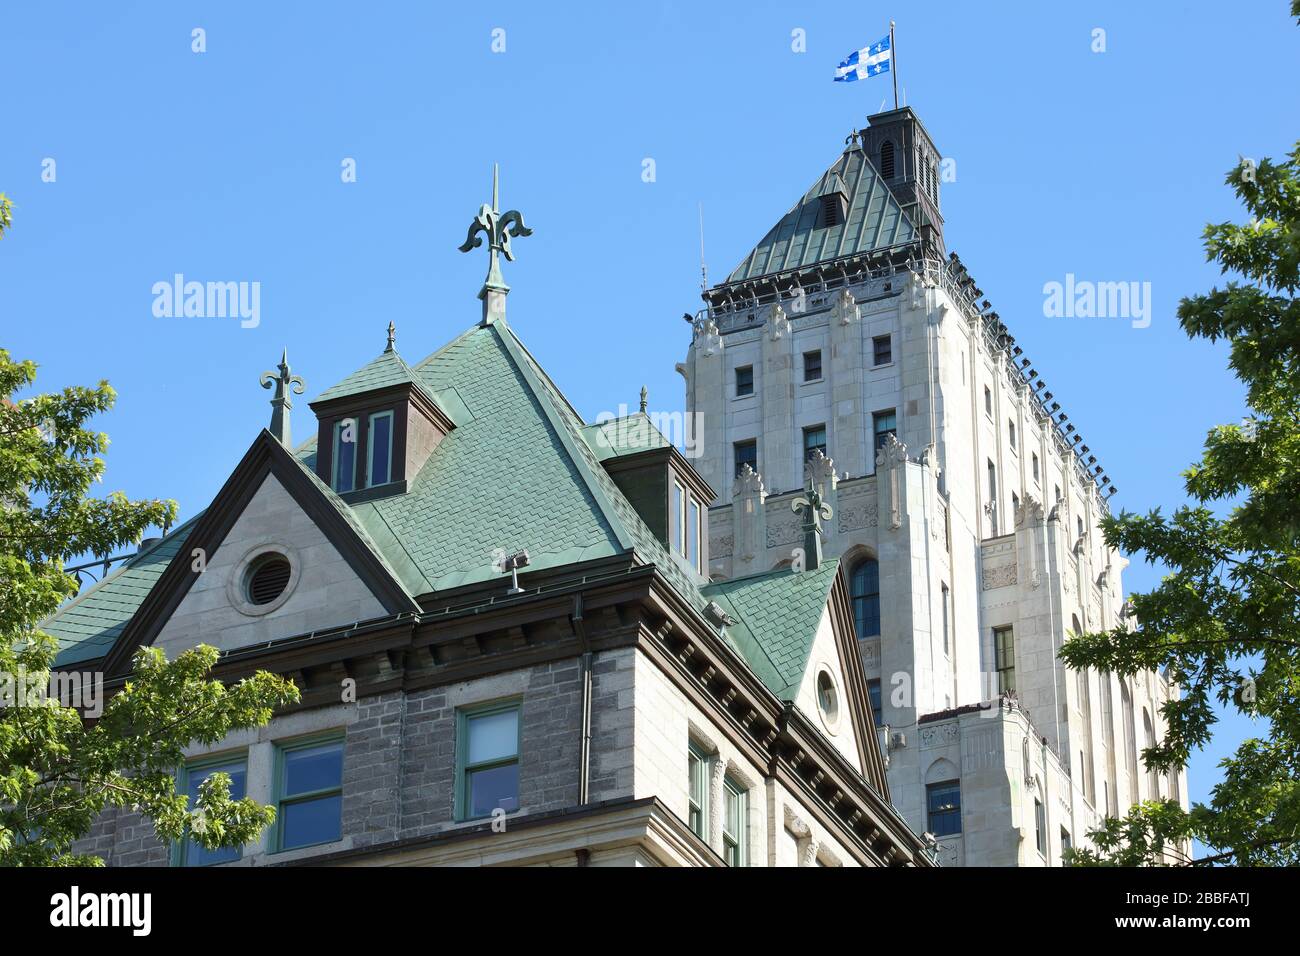 Architectural details of two rooftops: Art Deco-style Price Building in the background and the Second Empire-style of Quebec's City Hall in the foreground, Upper Town, Old Quebec City, Province of Quebec, Canada Stock Photo